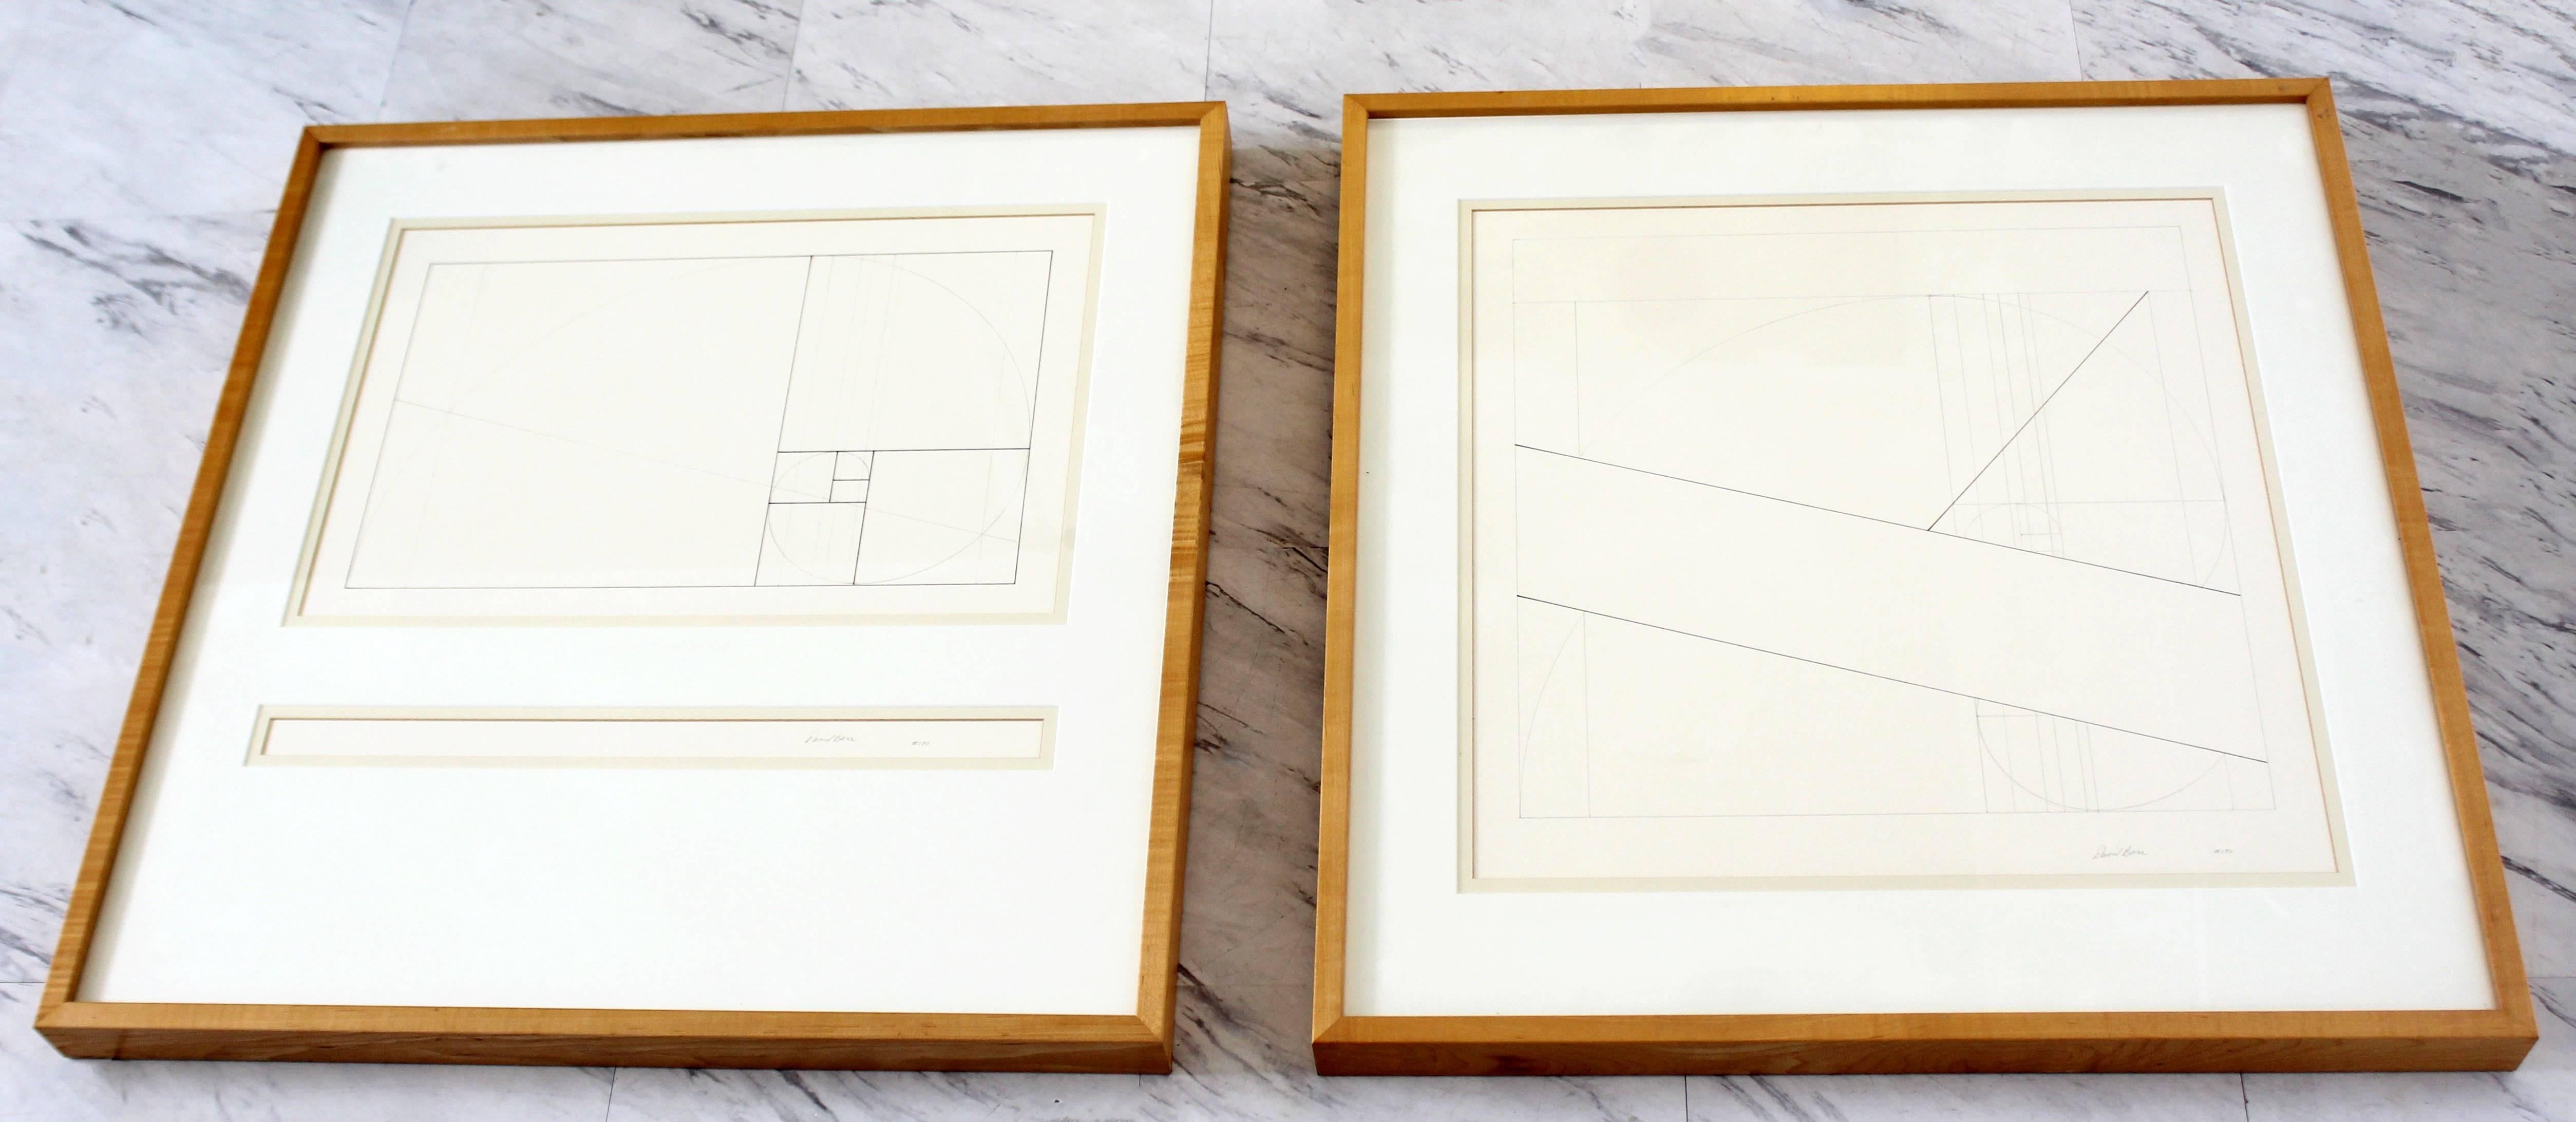 For your consideration is a set of three framed, geometrical prints, signed by David Barr, #170. In excellent condition. The dimensions of each are 26